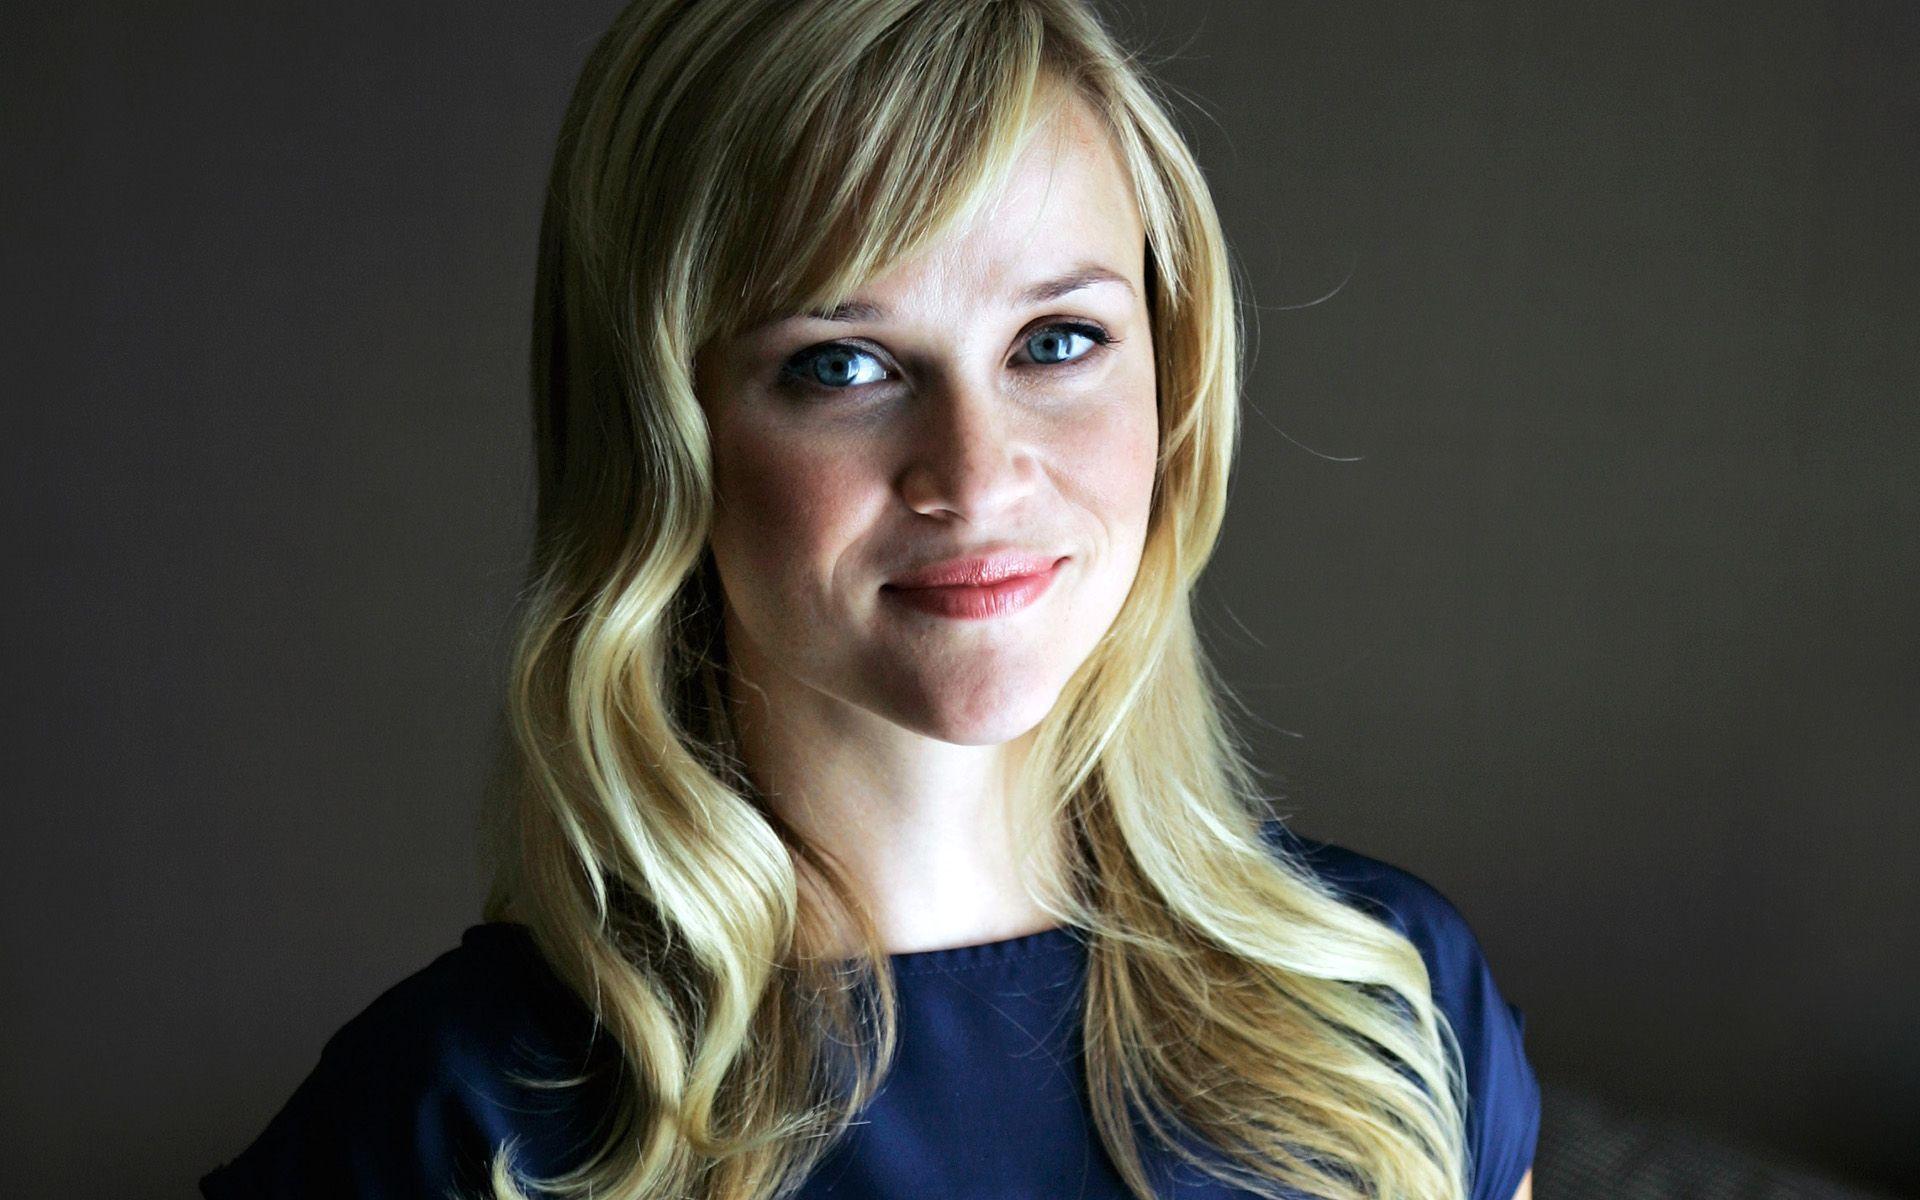 Reese Witherspoon HD Wallpaper for desktop download